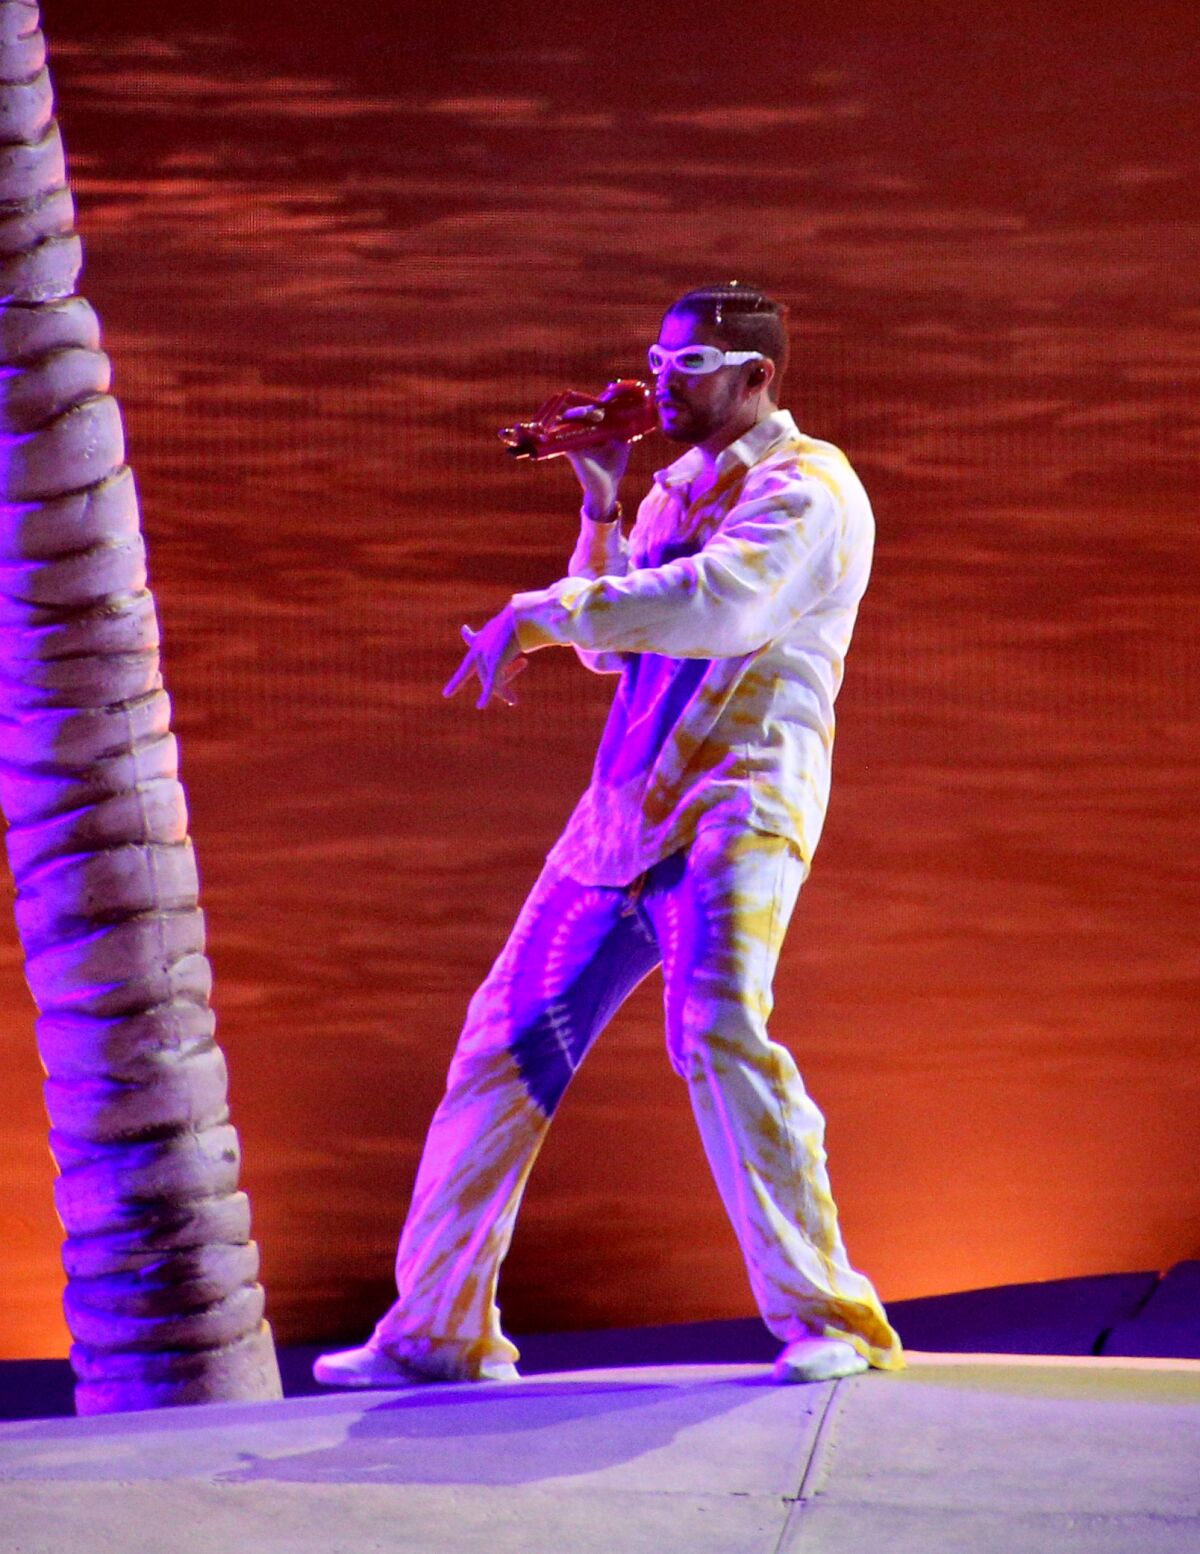 A Latino singer/rapper performs on stage